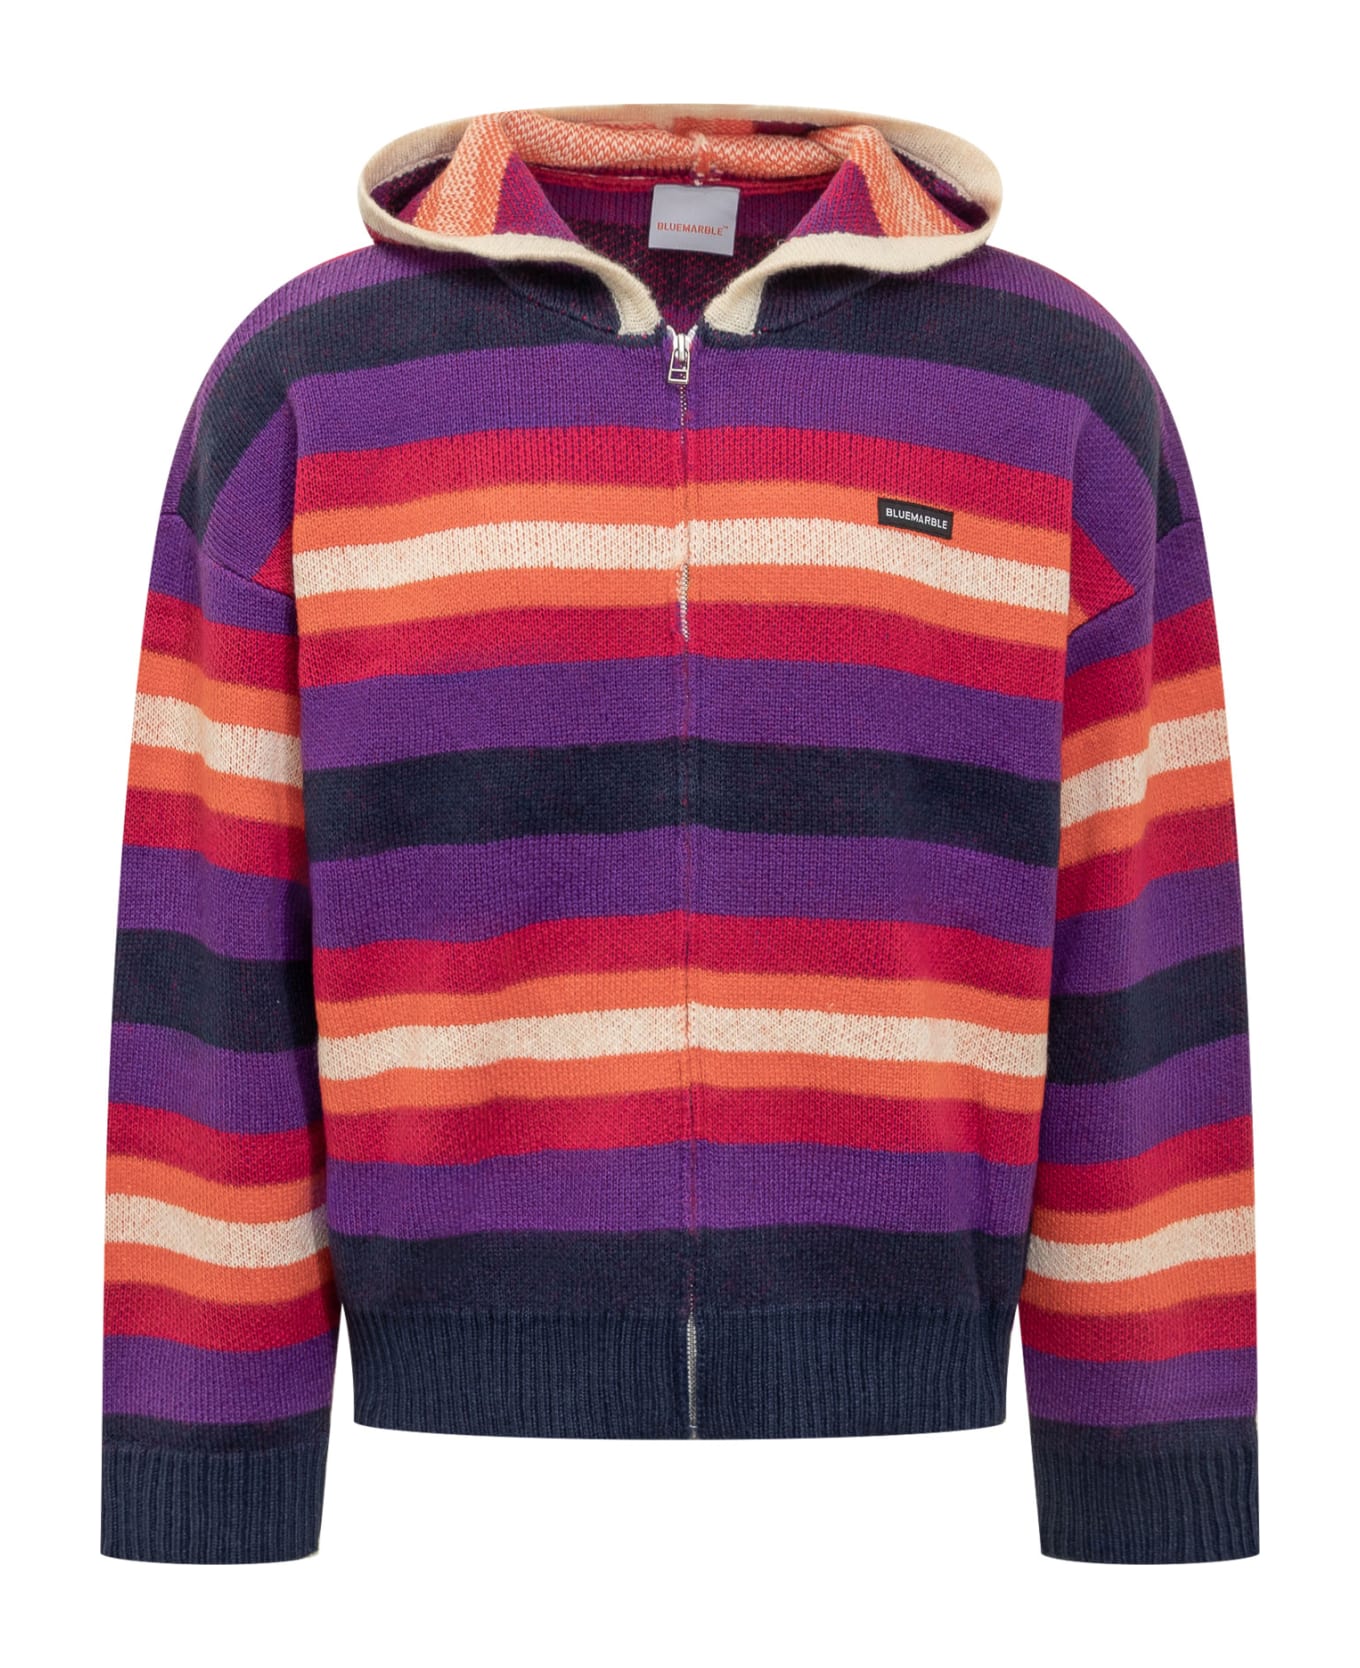 Bluemarble Knitted Sweater - MULTICOLOR STRIPES フリース